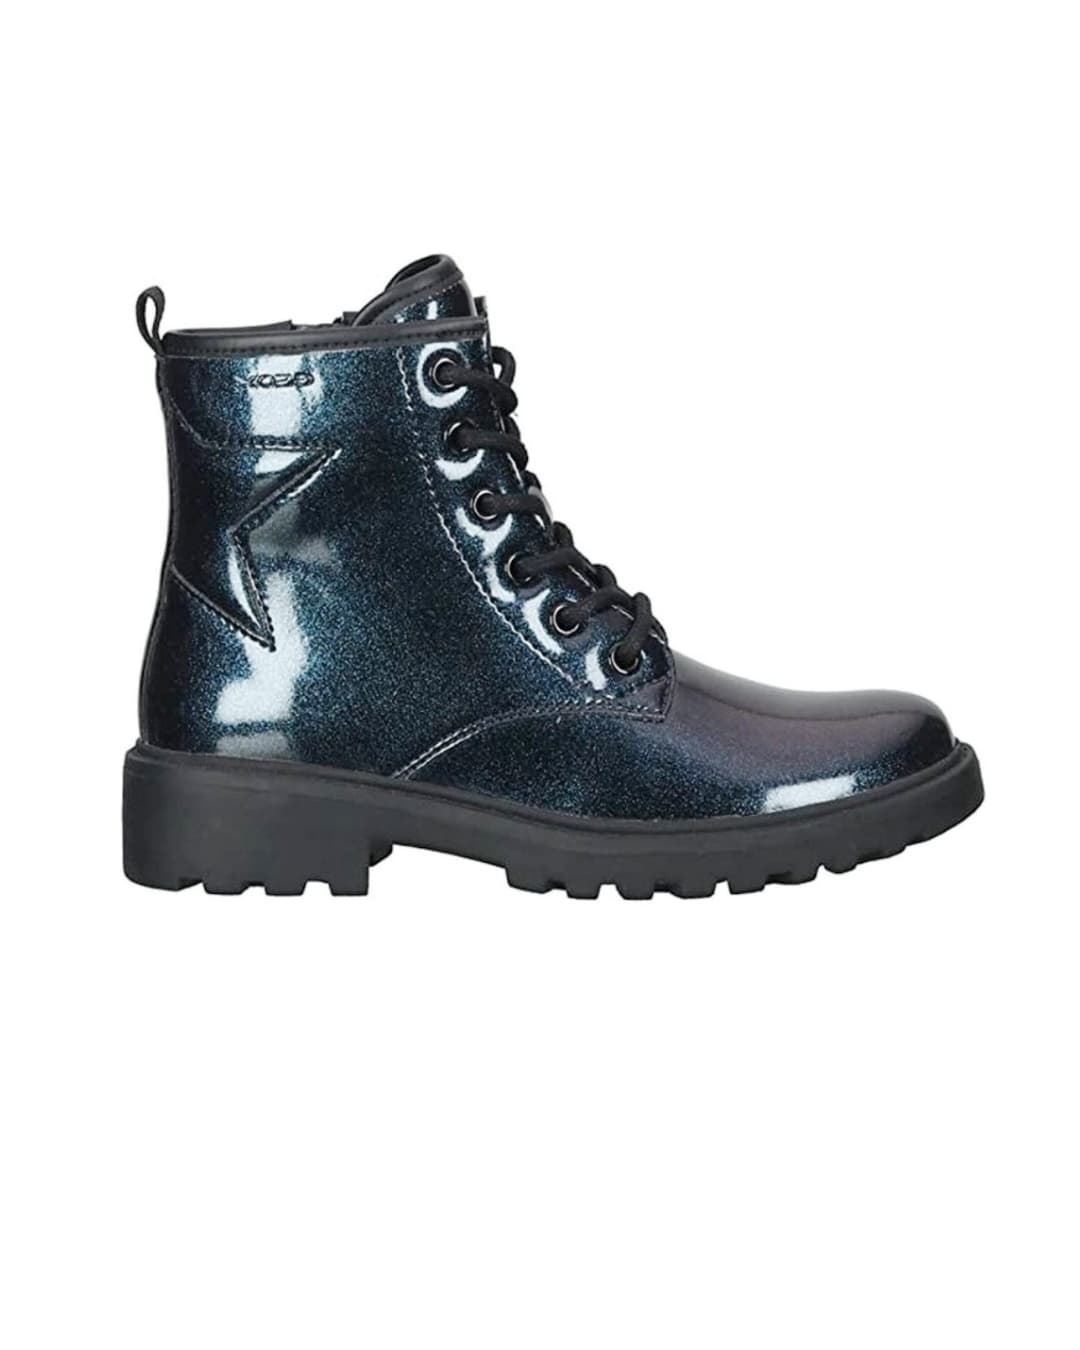 Geox Girls Boots Casey Patent Leather Metallic Blue - Image 1